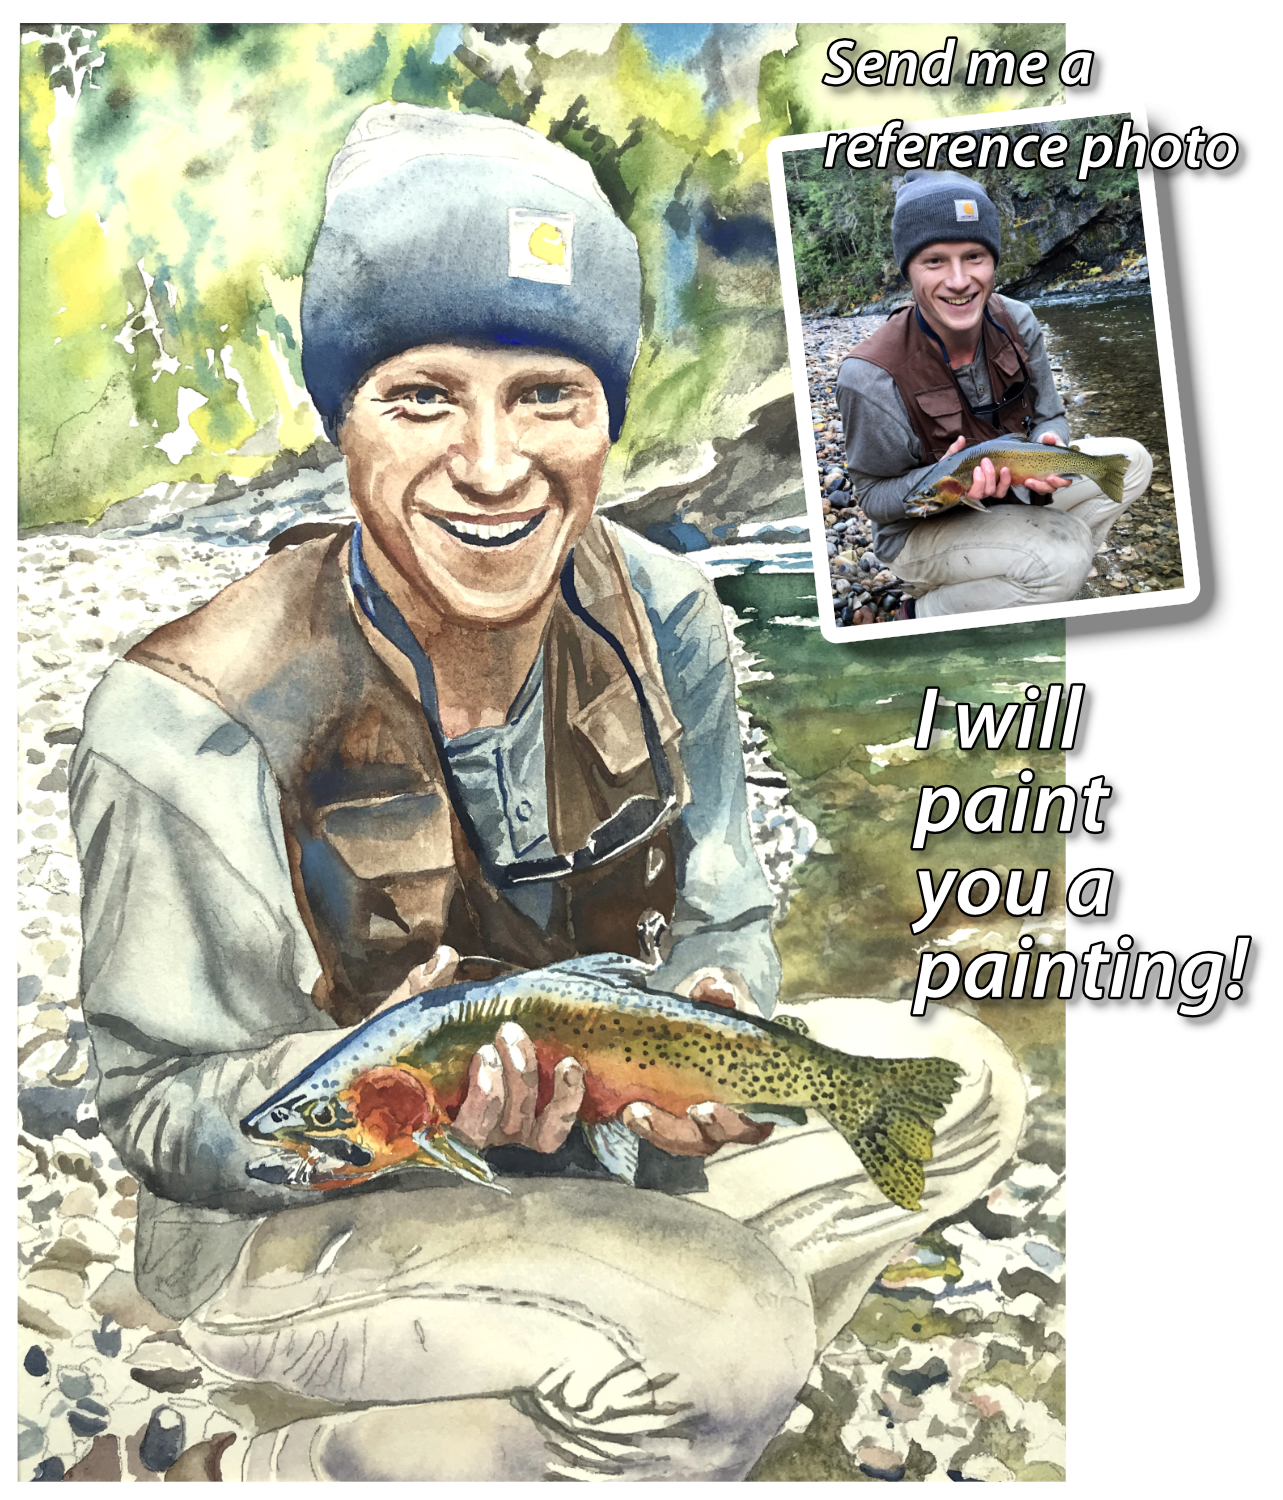 "Your fishing memory" - commission me to paint your fishing memory.